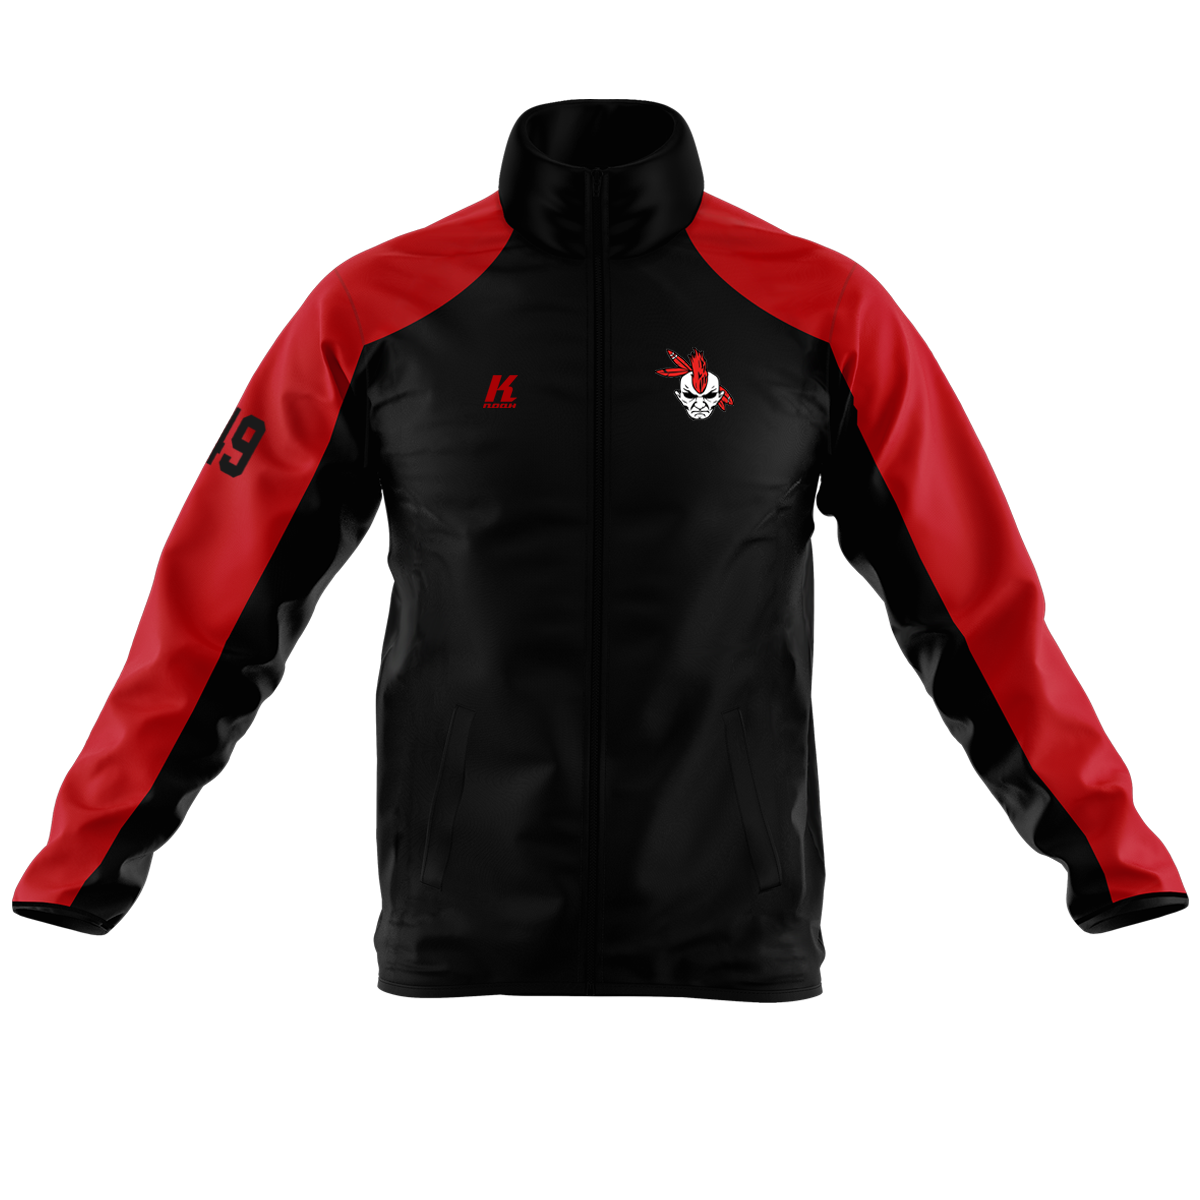 Warriors PRO Tracksuit Top Windstop with Playernumber or Initials